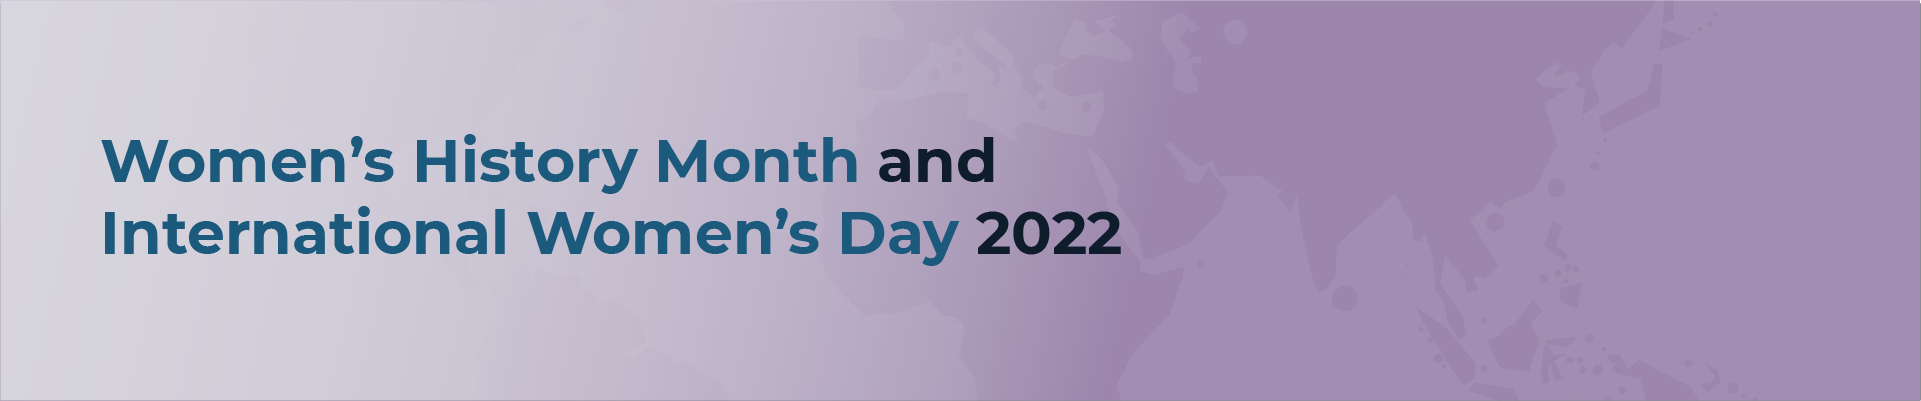 Women's History Month and International Women's Day 2022